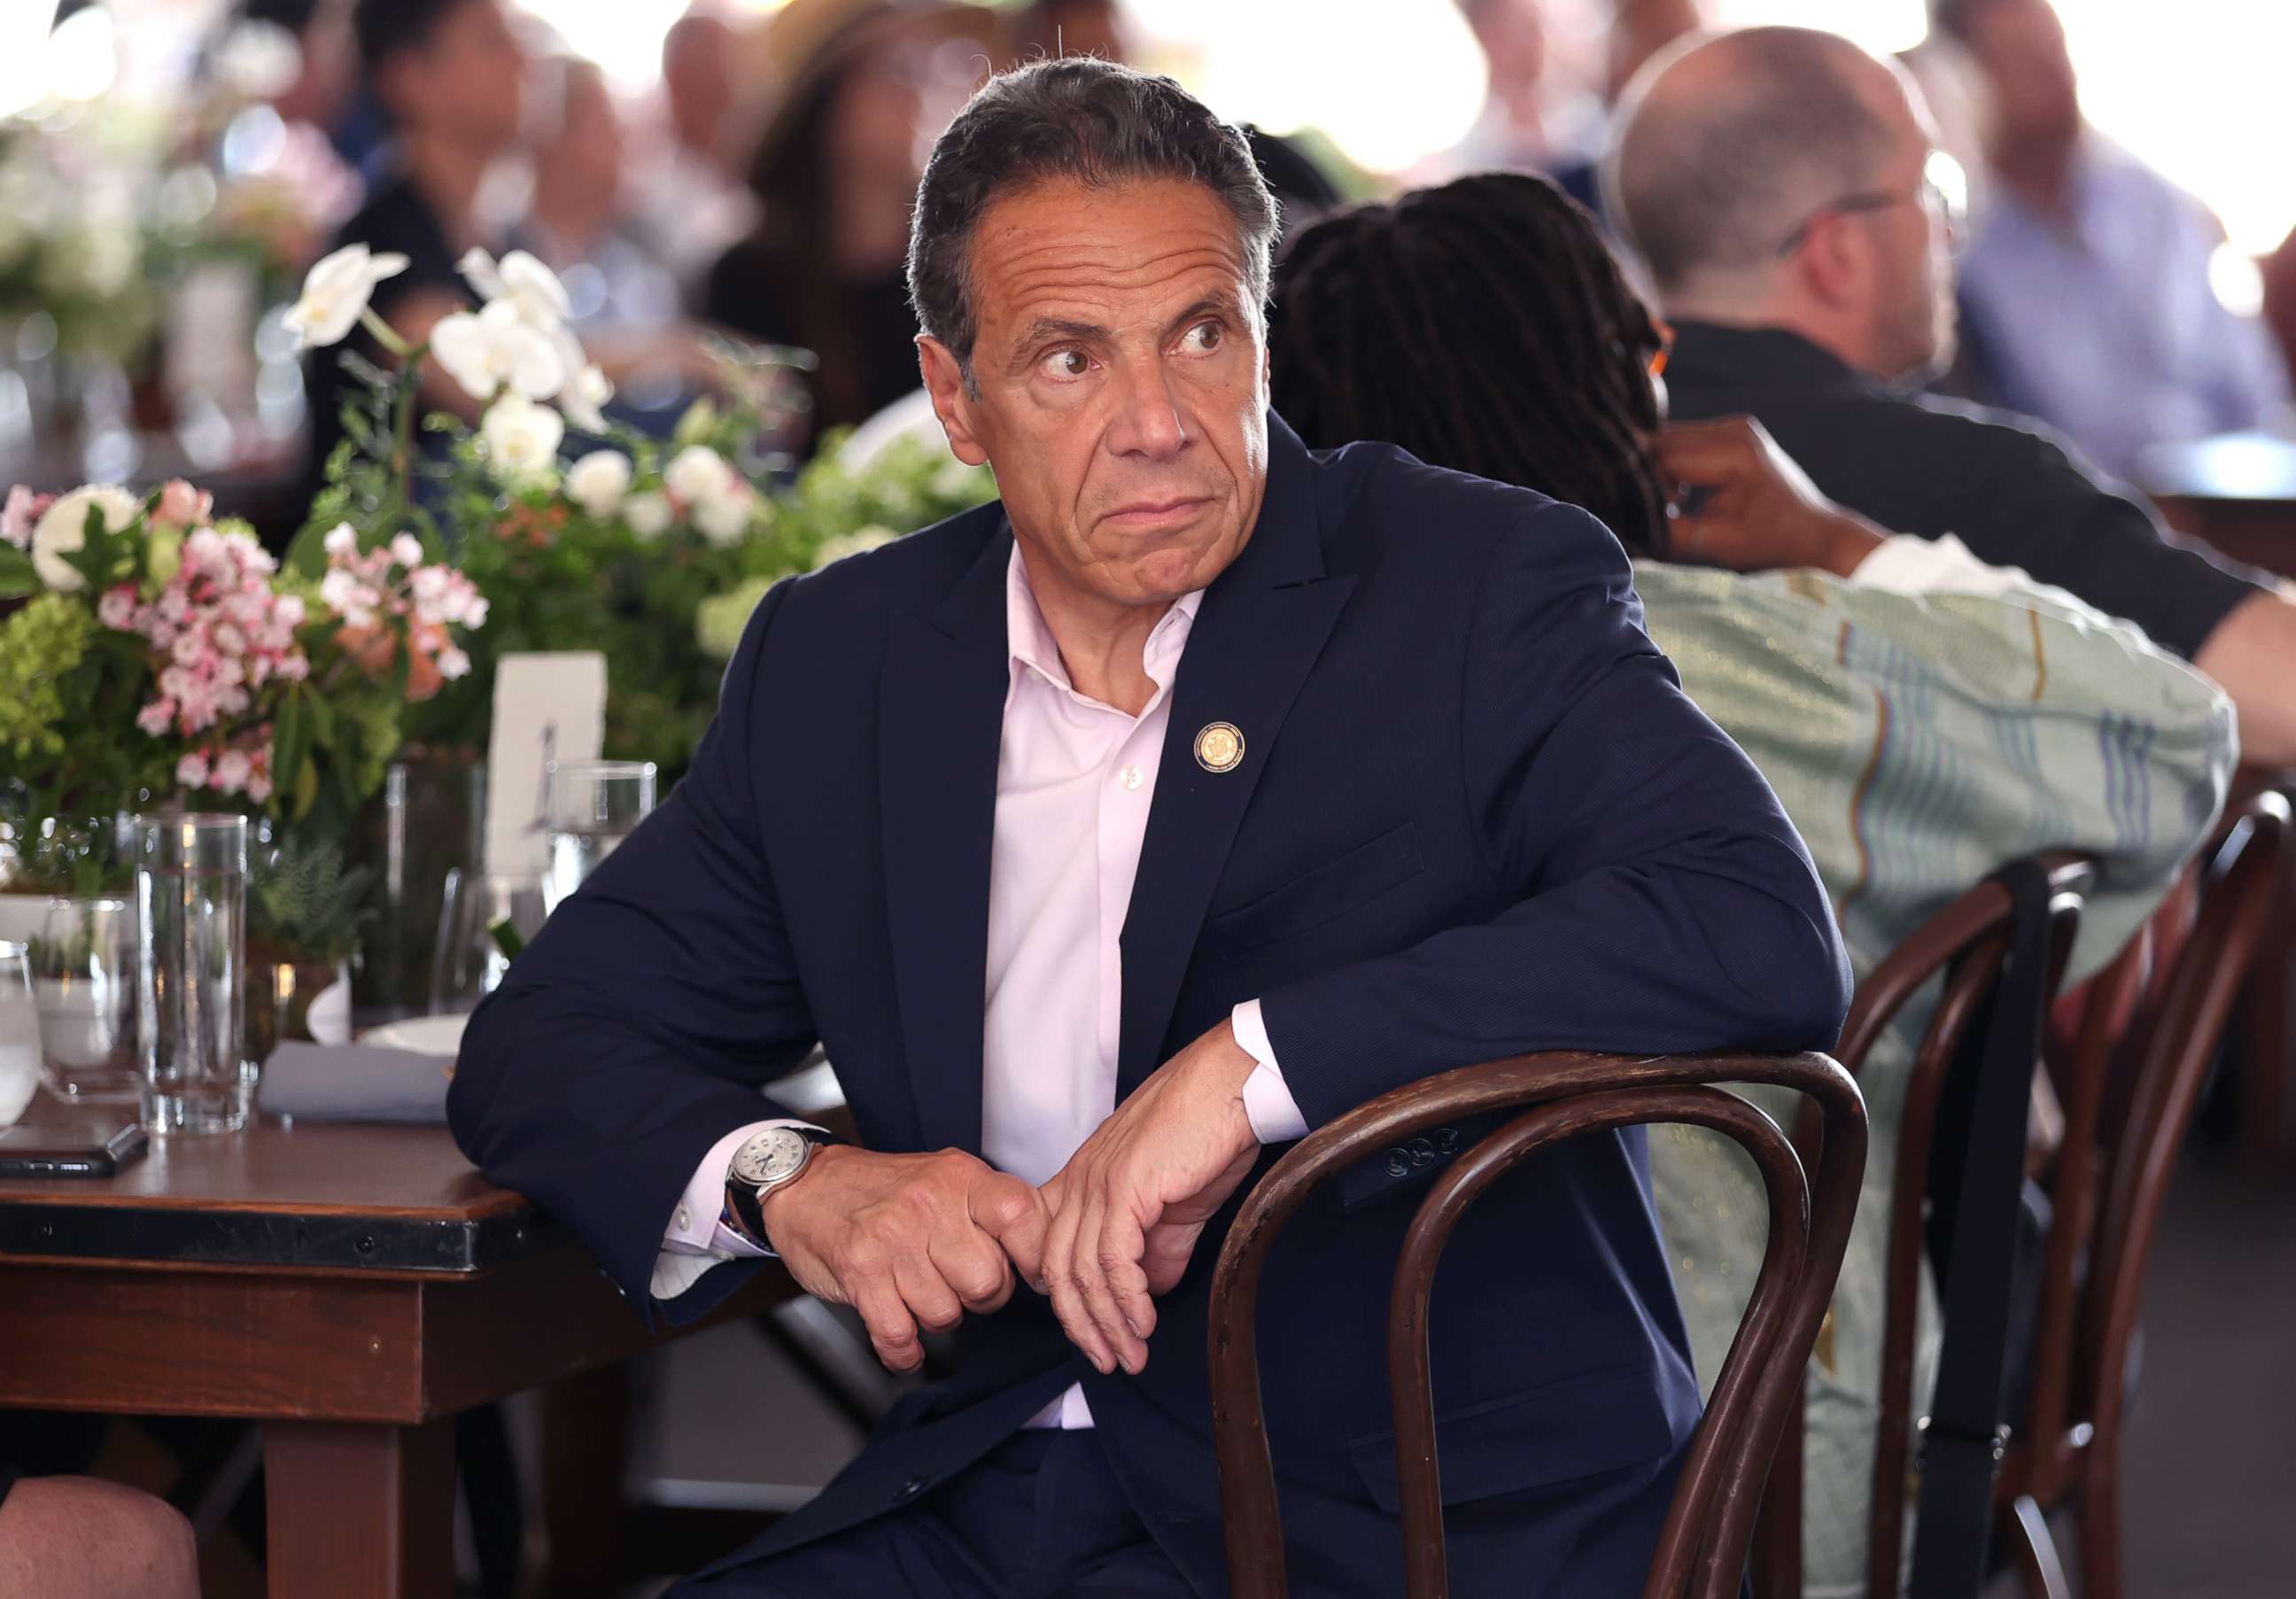 PHOTO: New York Gov. Andrew Cuomo attends an event, June 9, 2021, in New York City.